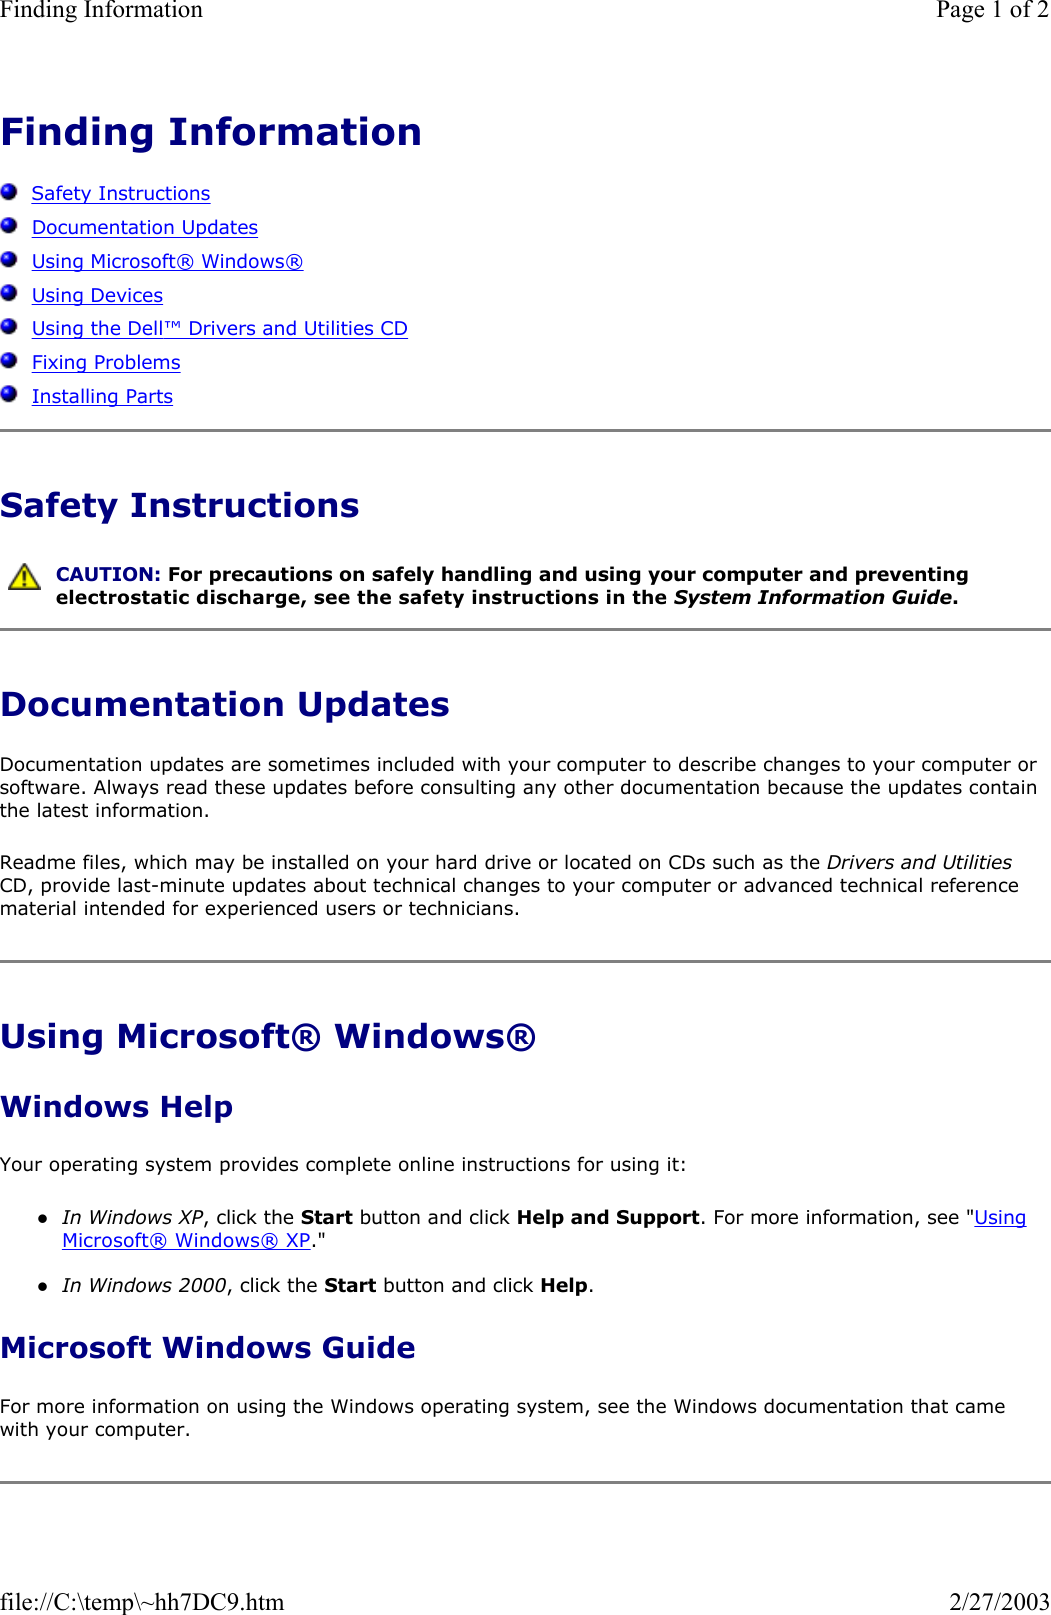 Finding Information      Safety Instructions   Documentation Updates   Using Microsoft® Windows®   Using Devices   Using the Dell™ Drivers and Utilities CD   Fixing Problems   Installing Parts Safety Instructions Documentation Updates Documentation updates are sometimes included with your computer to describe changes to your computer or software. Always read these updates before consulting any other documentation because the updates contain the latest information. Readme files, which may be installed on your hard drive or located on CDs such as the Drivers and Utilities CD, provide last-minute updates about technical changes to your computer or advanced technical reference material intended for experienced users or technicians. Using Microsoft® Windows® Windows Help Your operating system provides complete online instructions for using it: zIn Windows XP, click the Start button and click Help and Support. For more information, see &quot;Using Microsoft® Windows® XP.&quot;  zIn Windows 2000, click the Start button and click Help.  Microsoft Windows Guide For more information on using the Windows operating system, see the Windows documentation that came with your computer.  CAUTION: For precautions on safely handling and using your computer and preventing electrostatic discharge, see the safety instructions in the System Information Guide.Page 1 of 2Finding Information2/27/2003file://C:\temp\~hh7DC9.htm